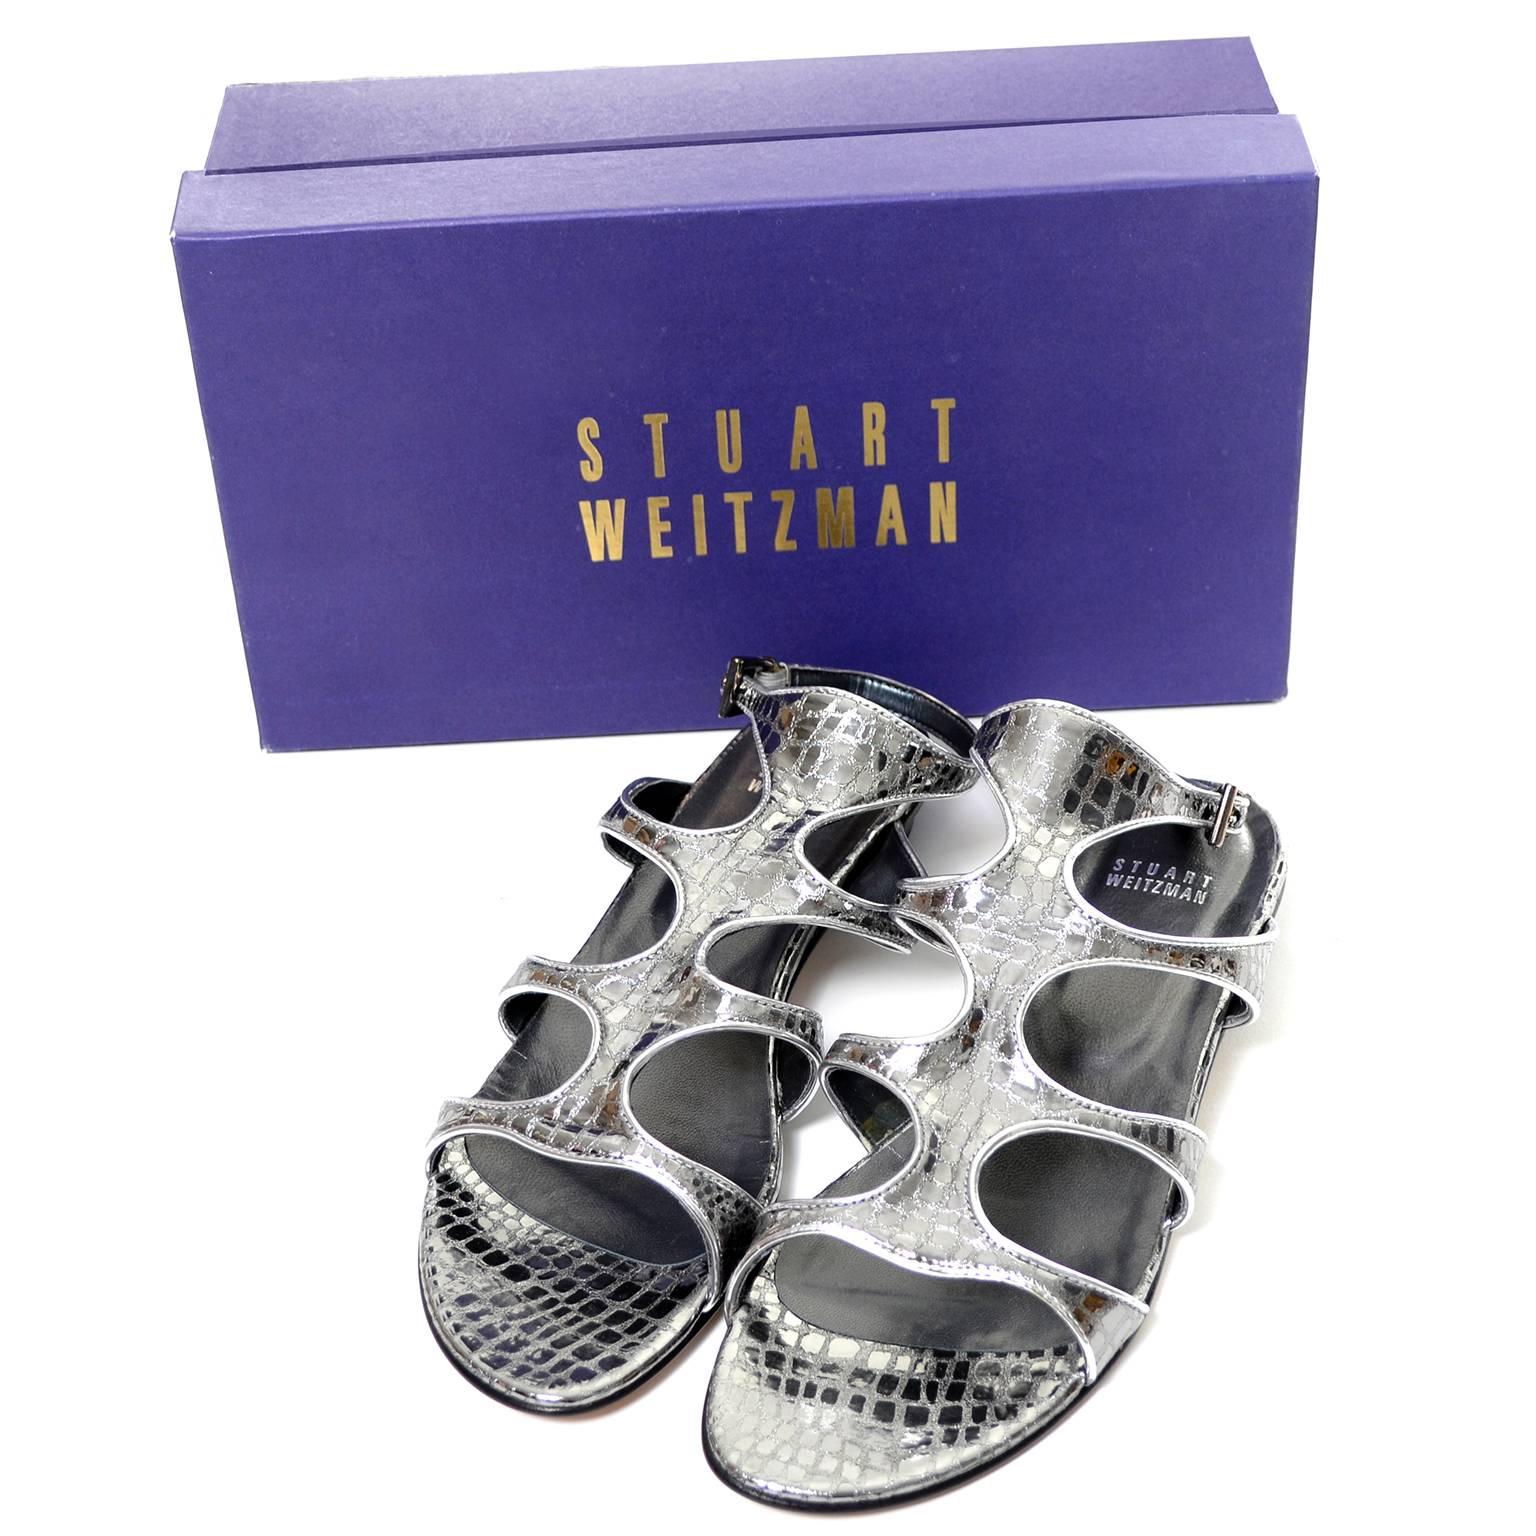 These gladiator metallic steel mini gator embossed leather Stuart Weitzman sandals are new and come in their original box.  The shoes have a 1/2